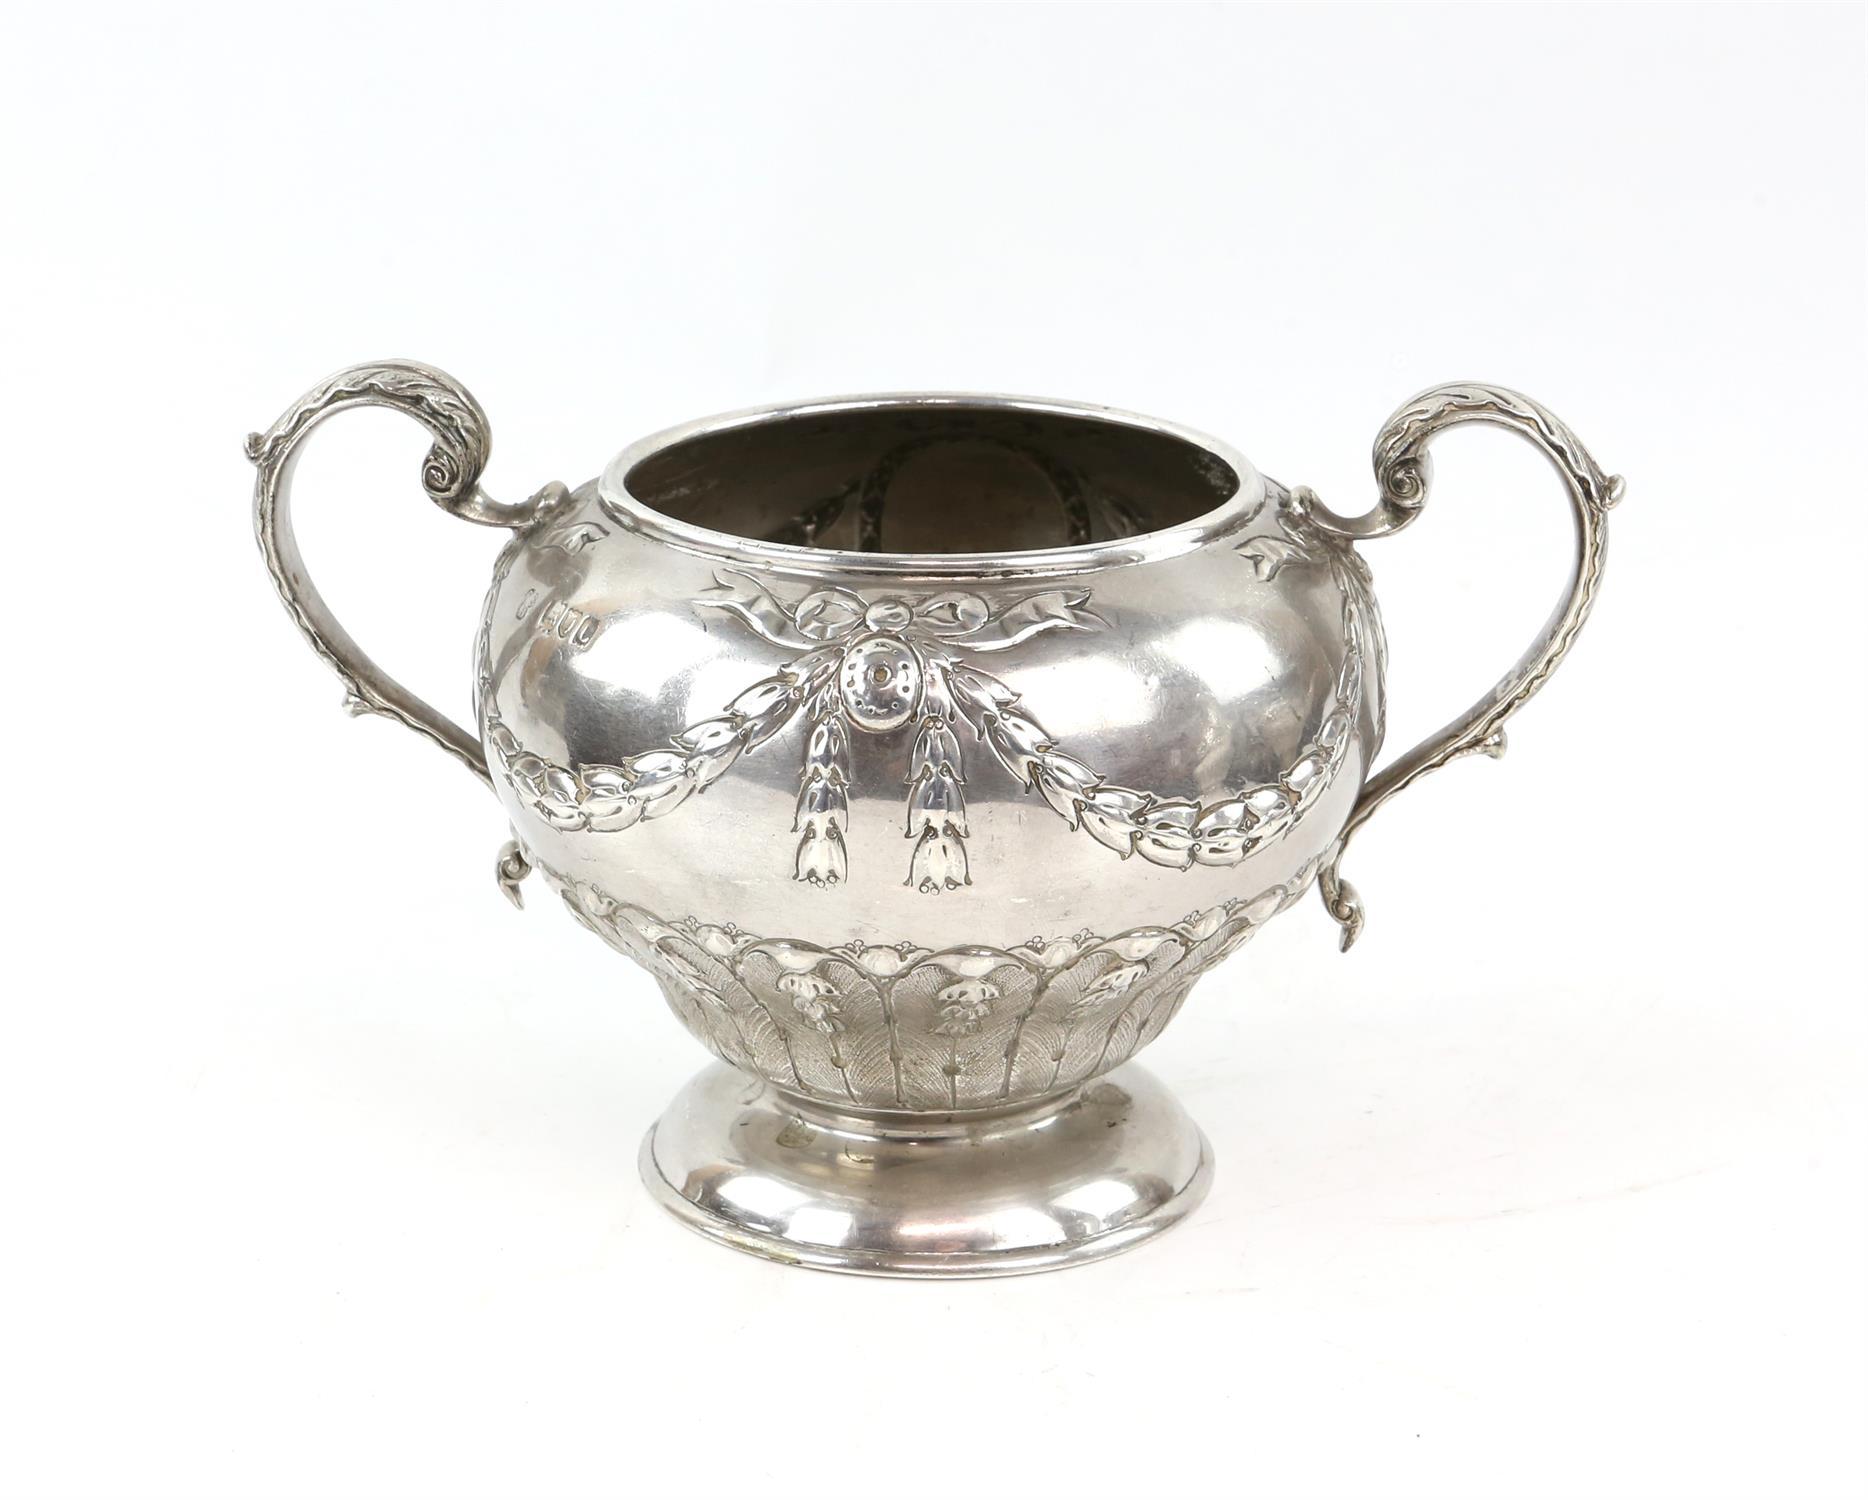 Victorian silver tea and coffee service with blank cartouches hung from ribbons and swags, - Image 7 of 13